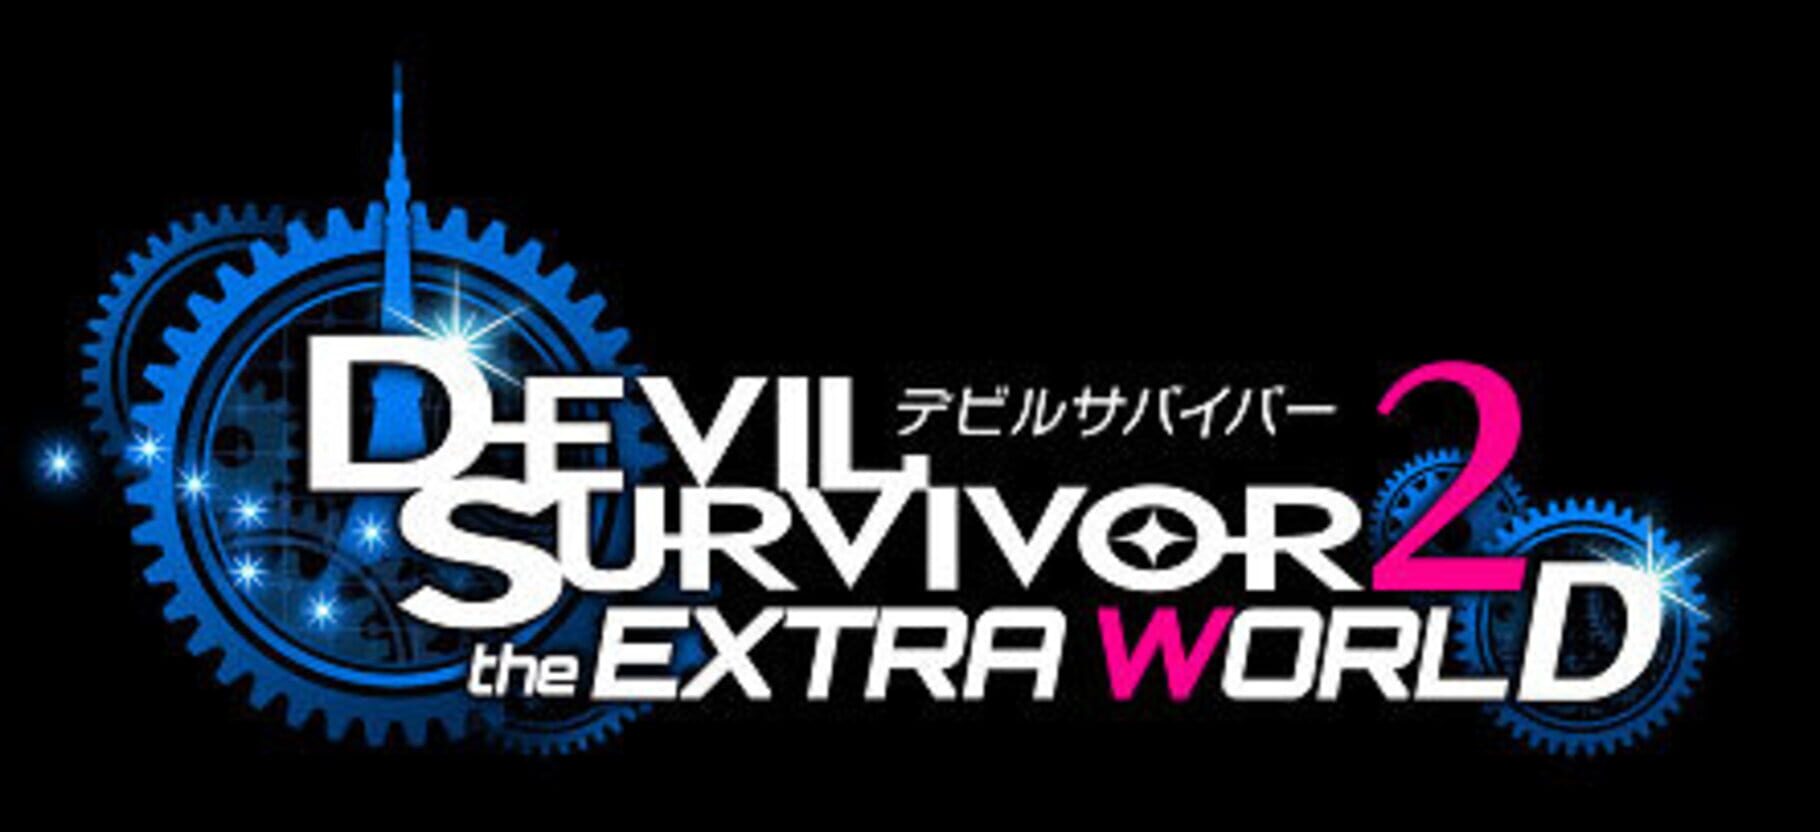 The extra world is